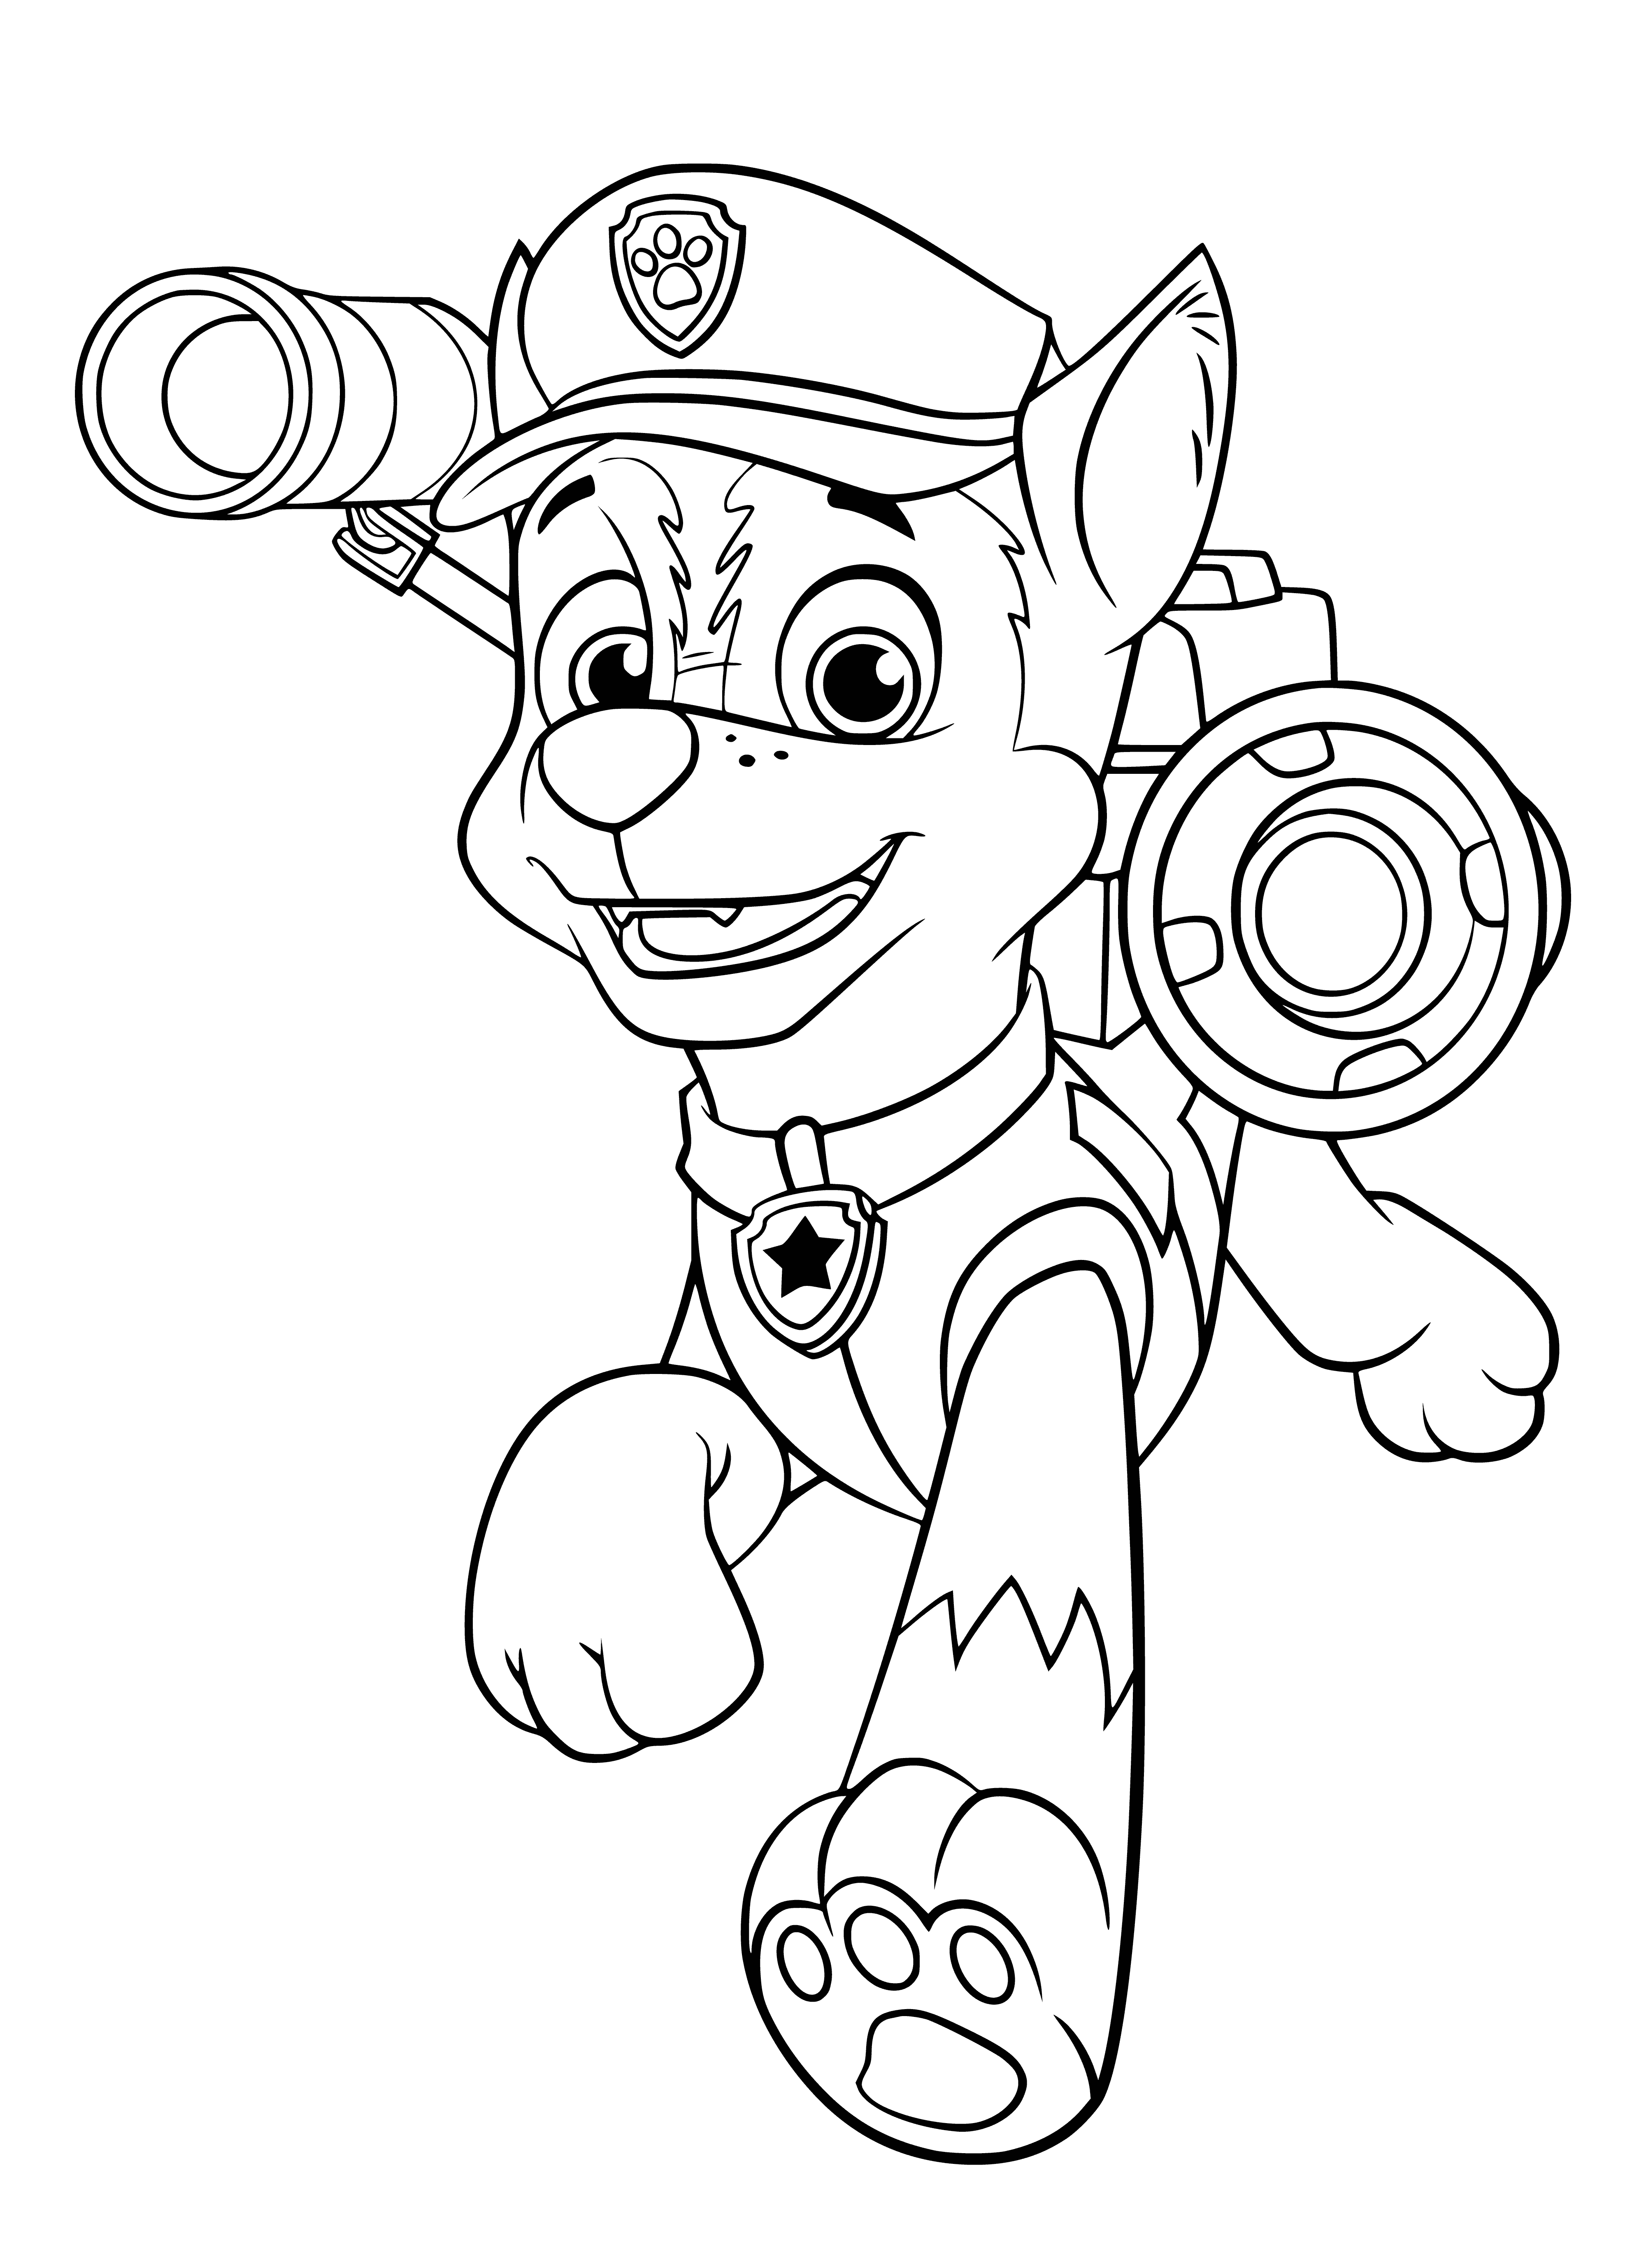 Cannon Racer coloring page